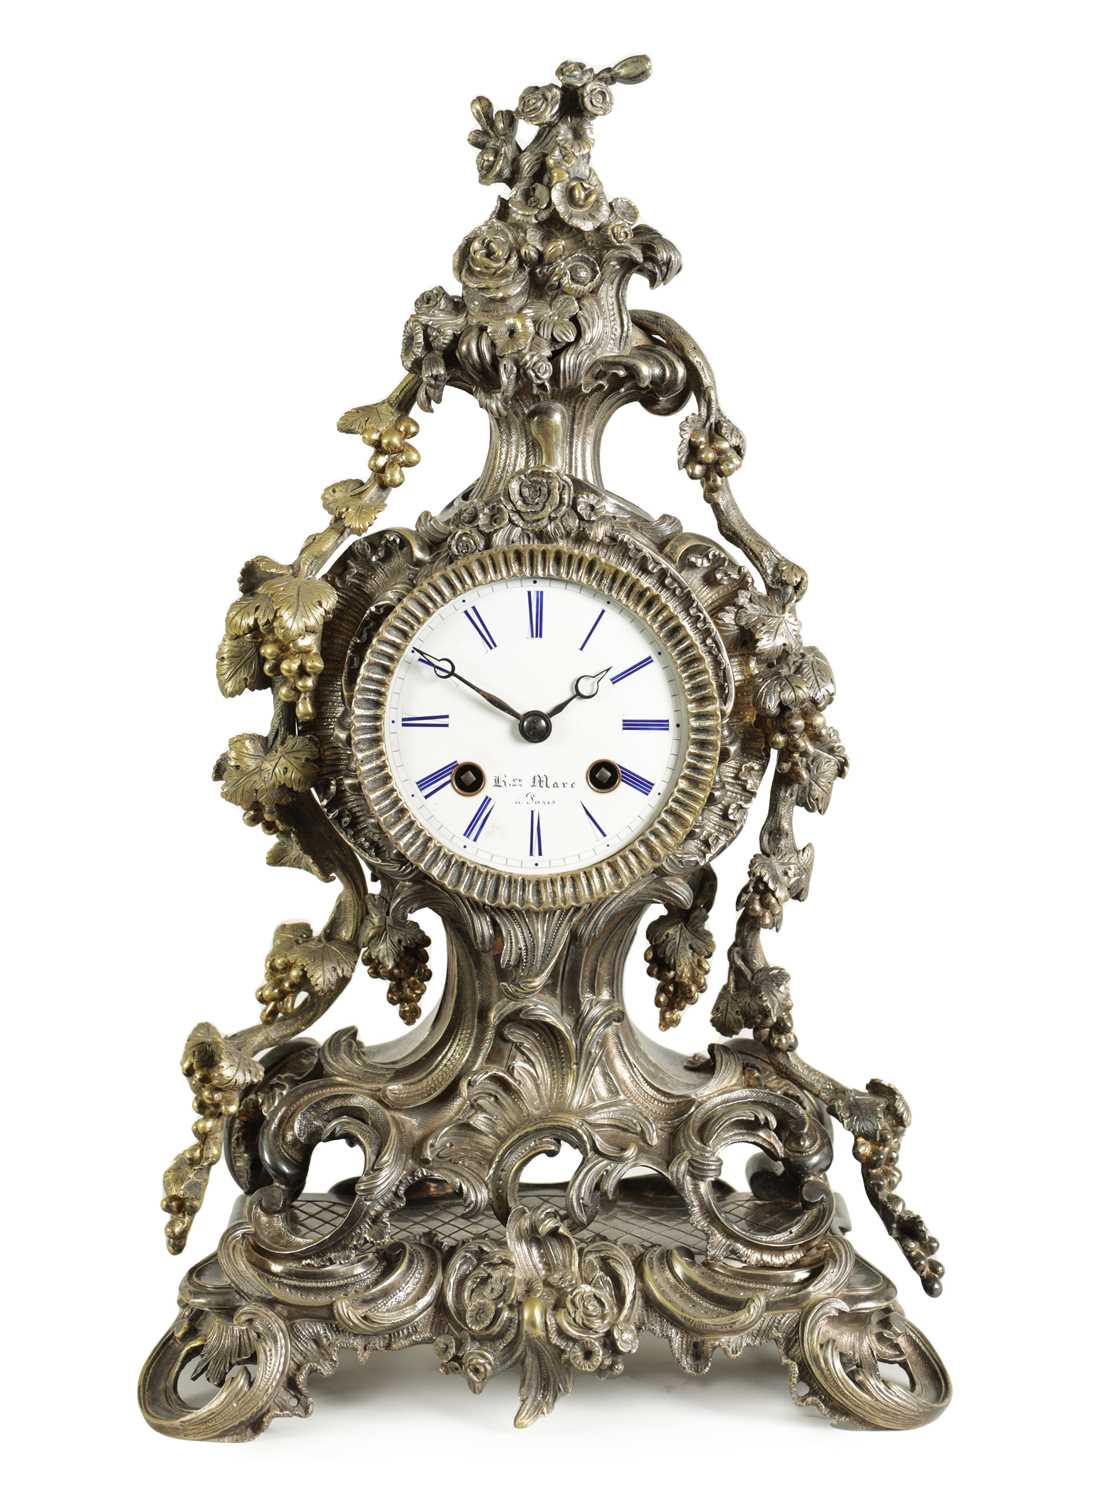 HENRY MARC, A PARIS. A MID 19TH CENTURY FRENCH ROCOCO STYLE SILVERED BRONZE MANTEL CLOCK